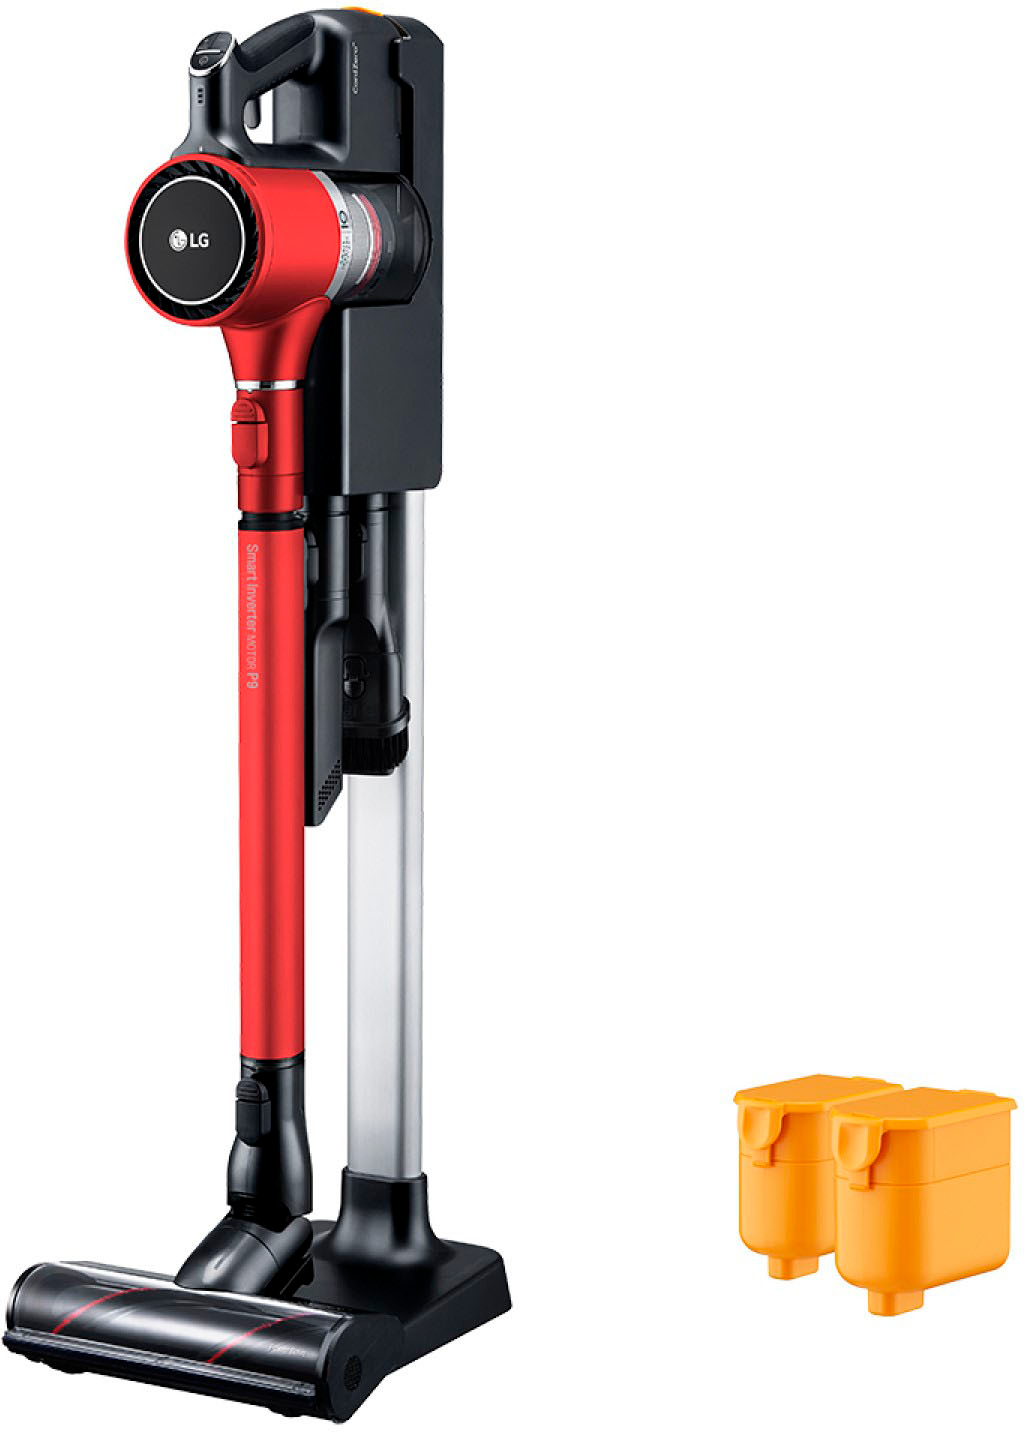 Angle View: LG - CordZero Cordless Stick Vacuum with 80-Minute Run Time - Matte Red